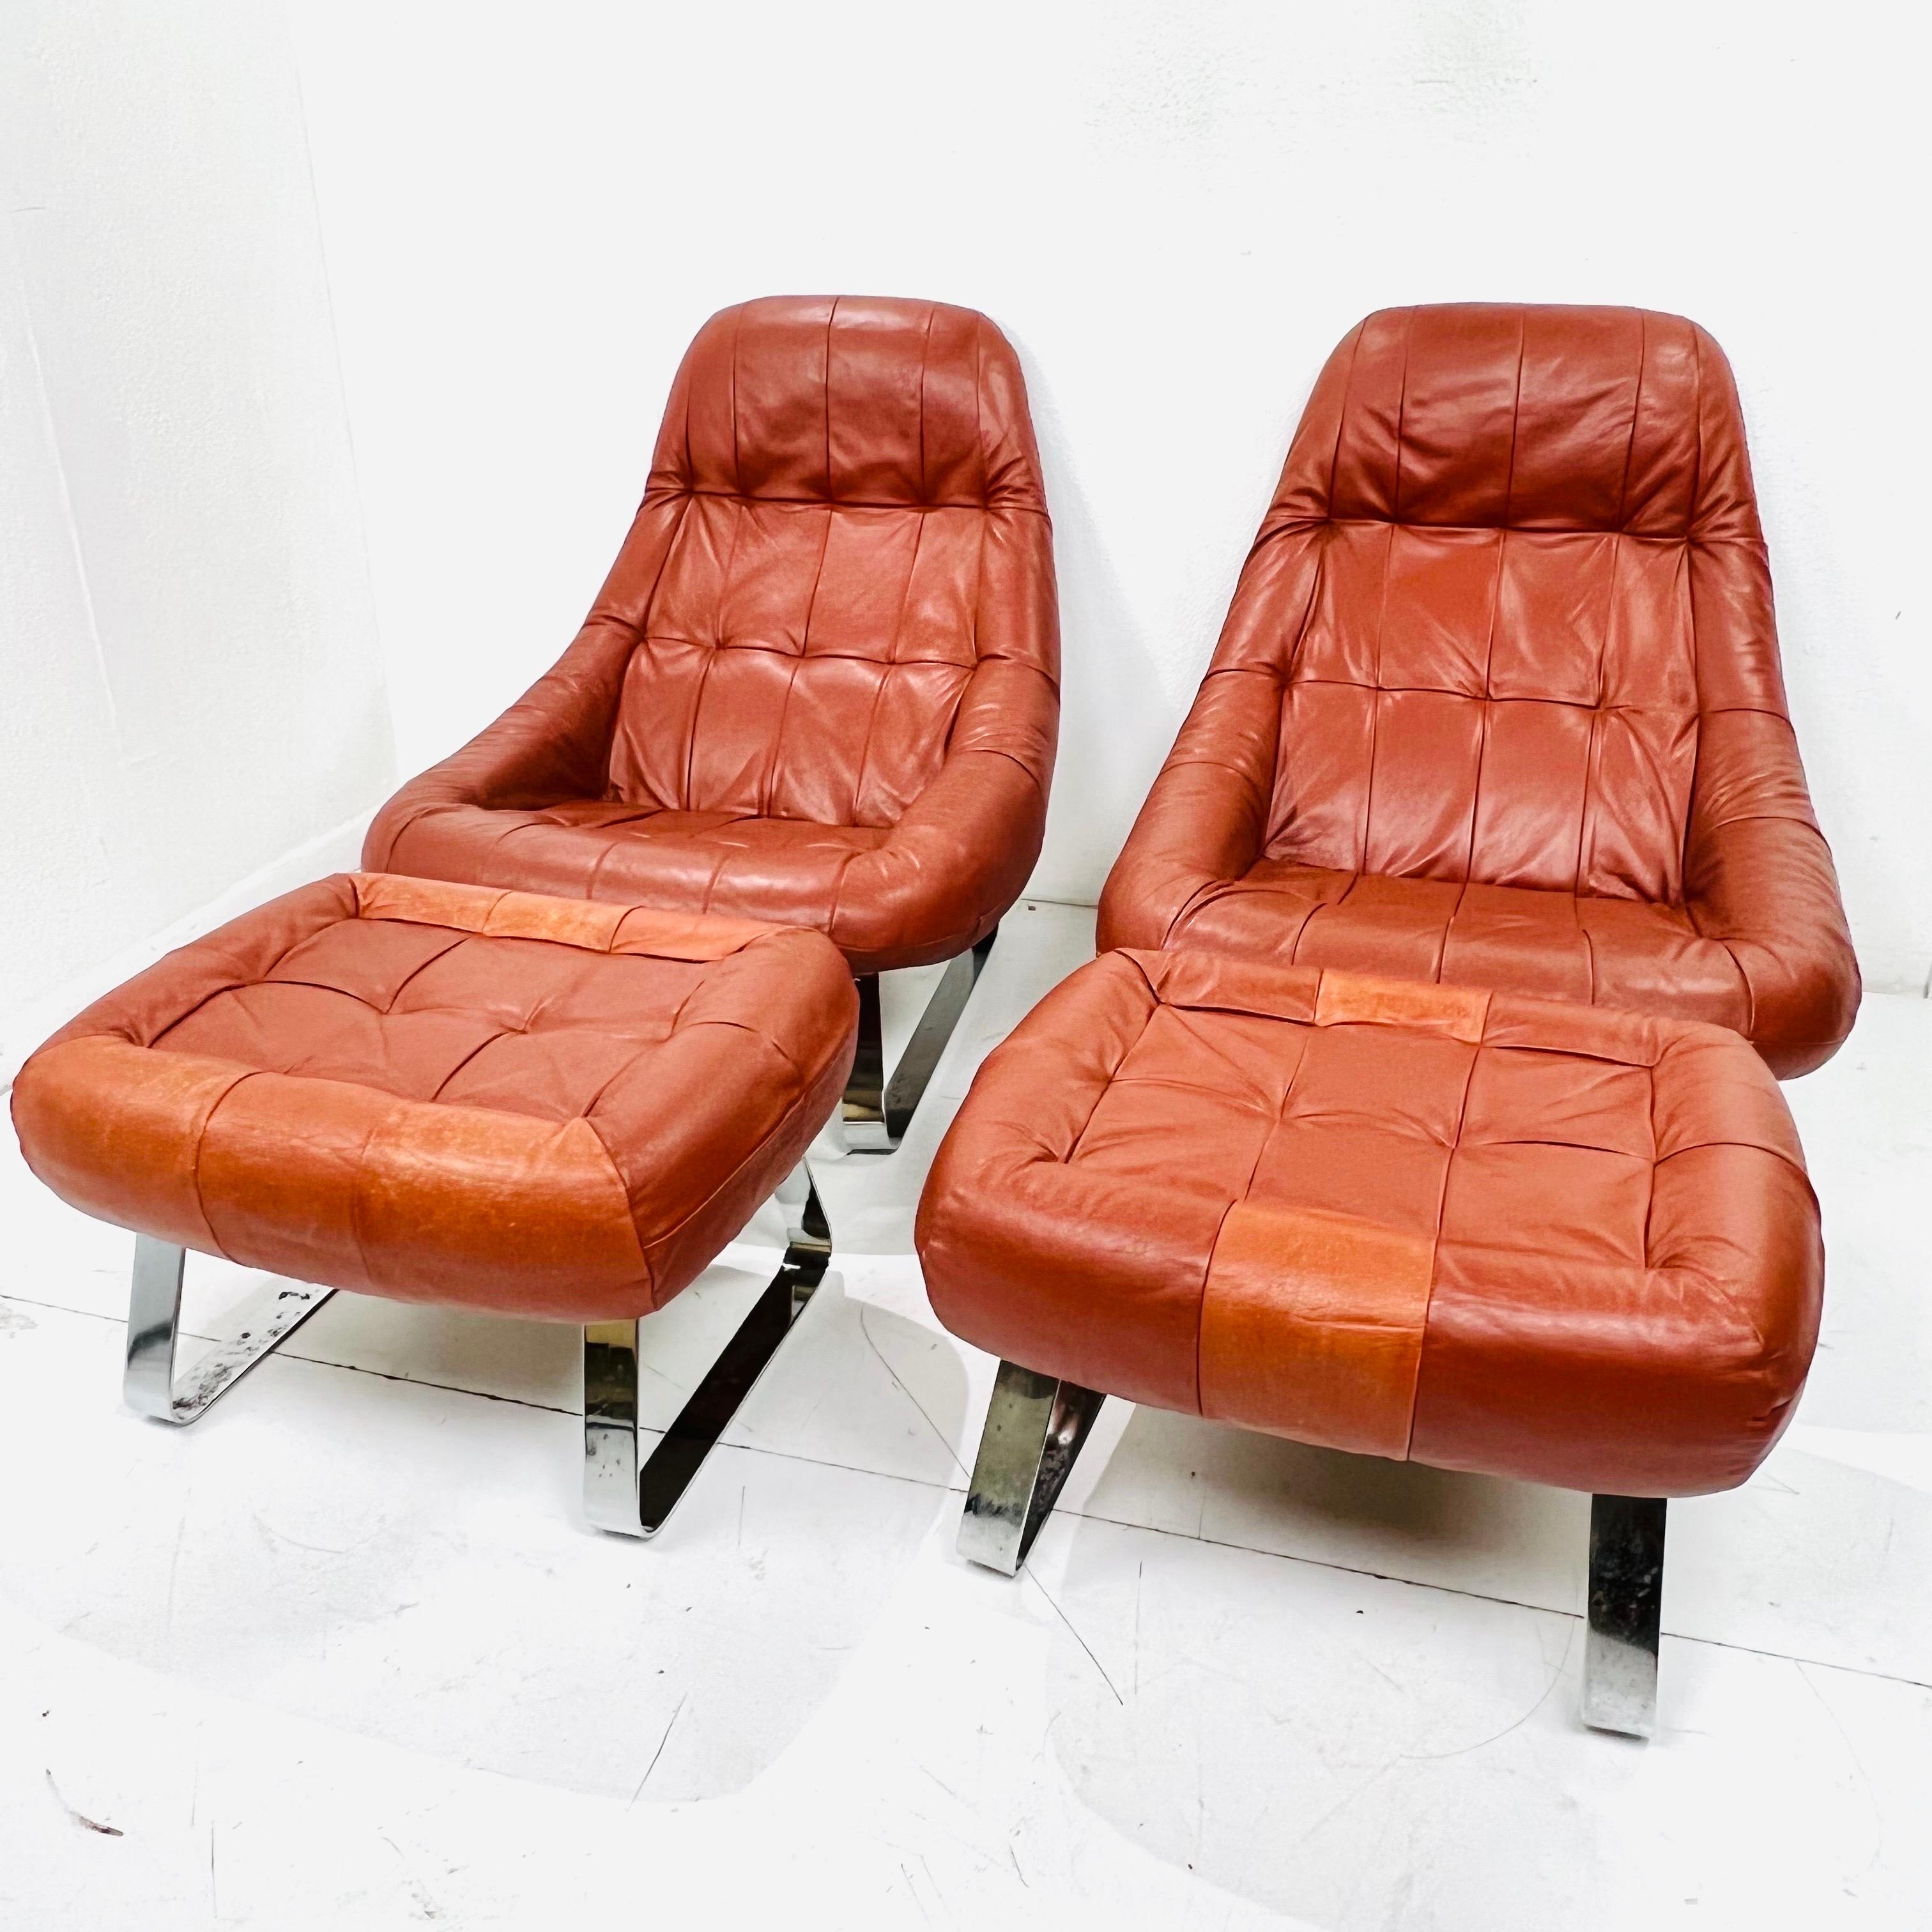 Polished Pair of Percival Lafer Earth Chairs with Ottomans